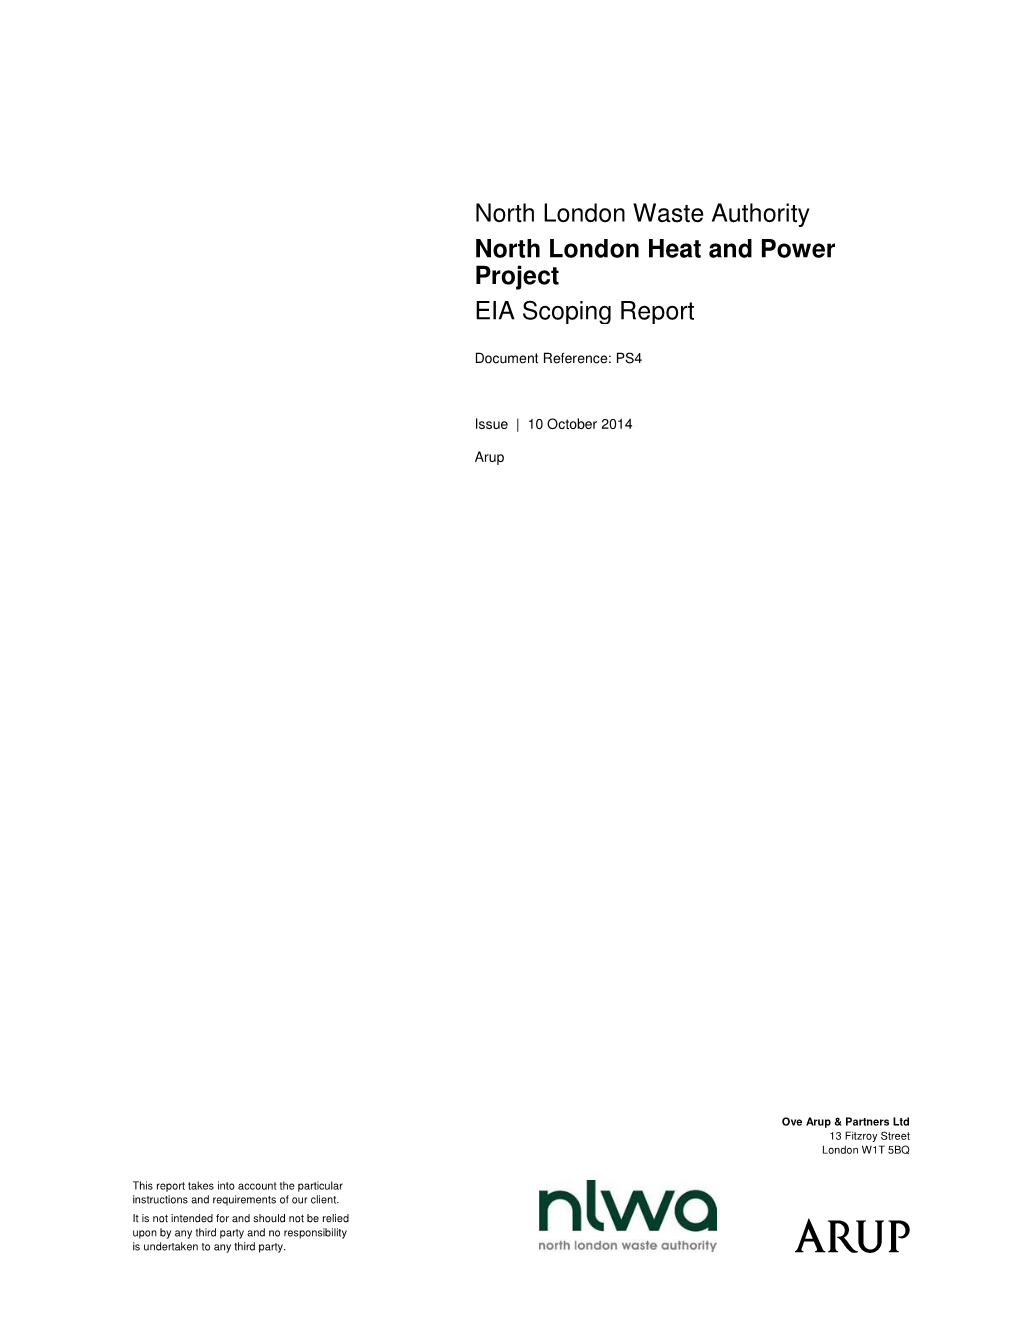 North London Waste Authority North London Heat and Power Project EIA Scoping Report